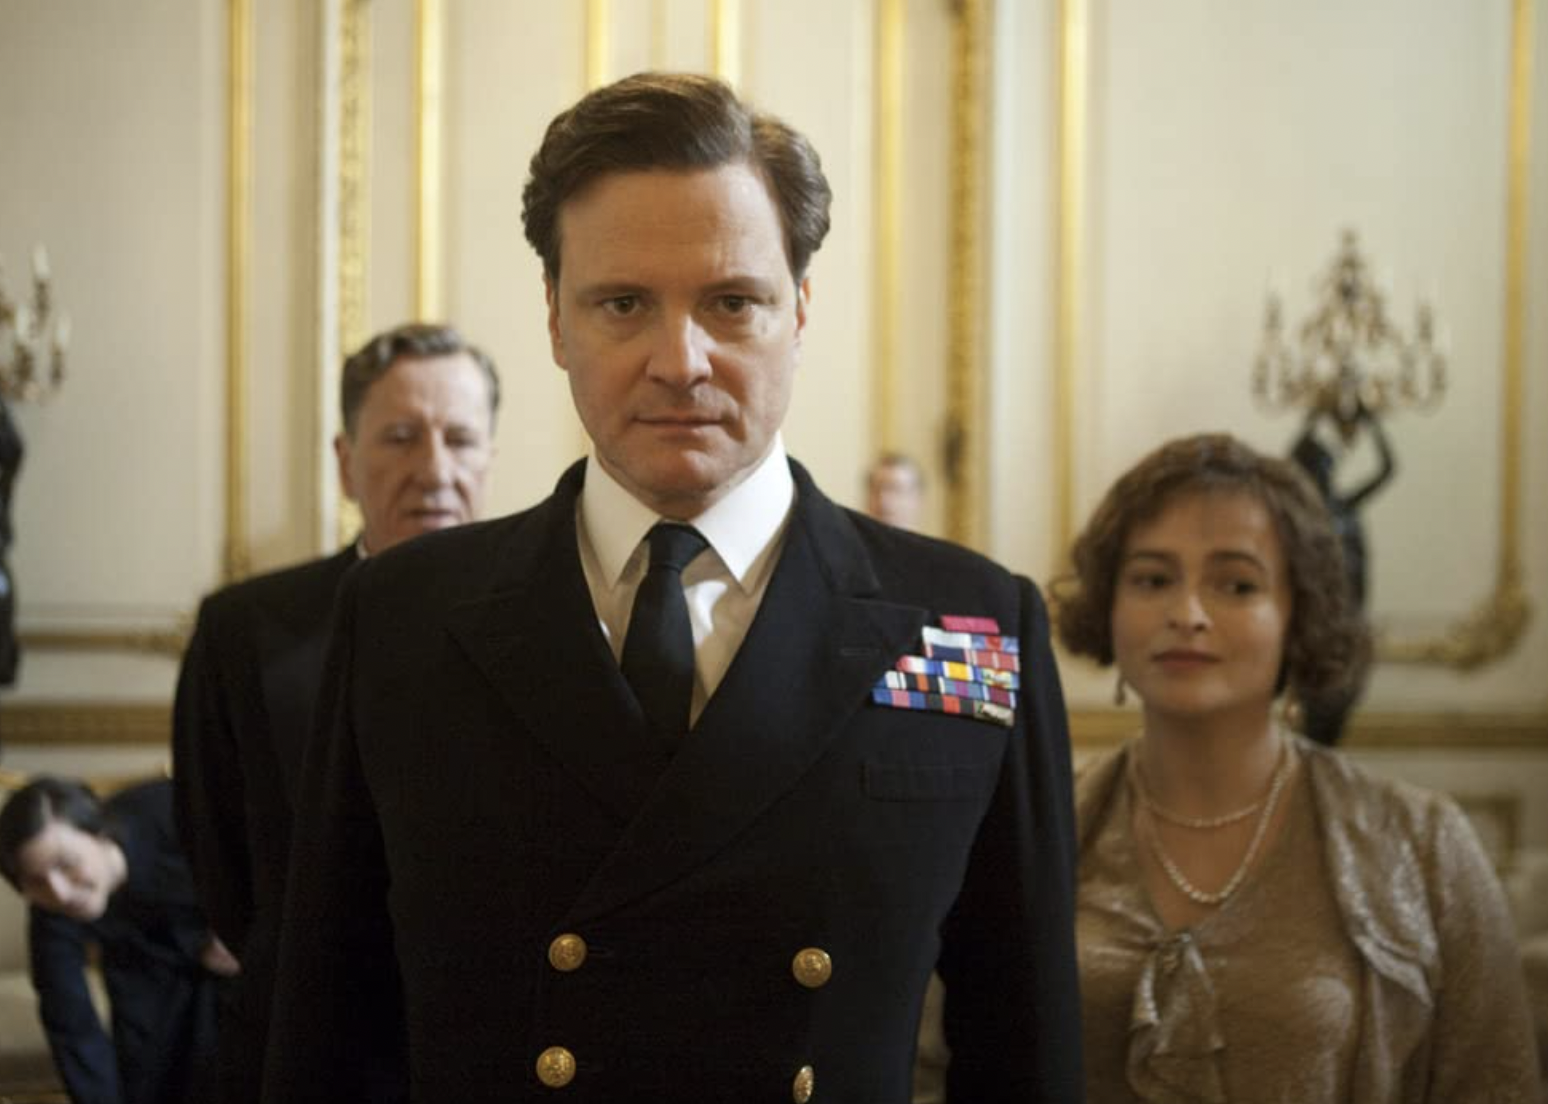 Colin Firth, Helena Bonham Carter, and Geoffrey Rush in "The King